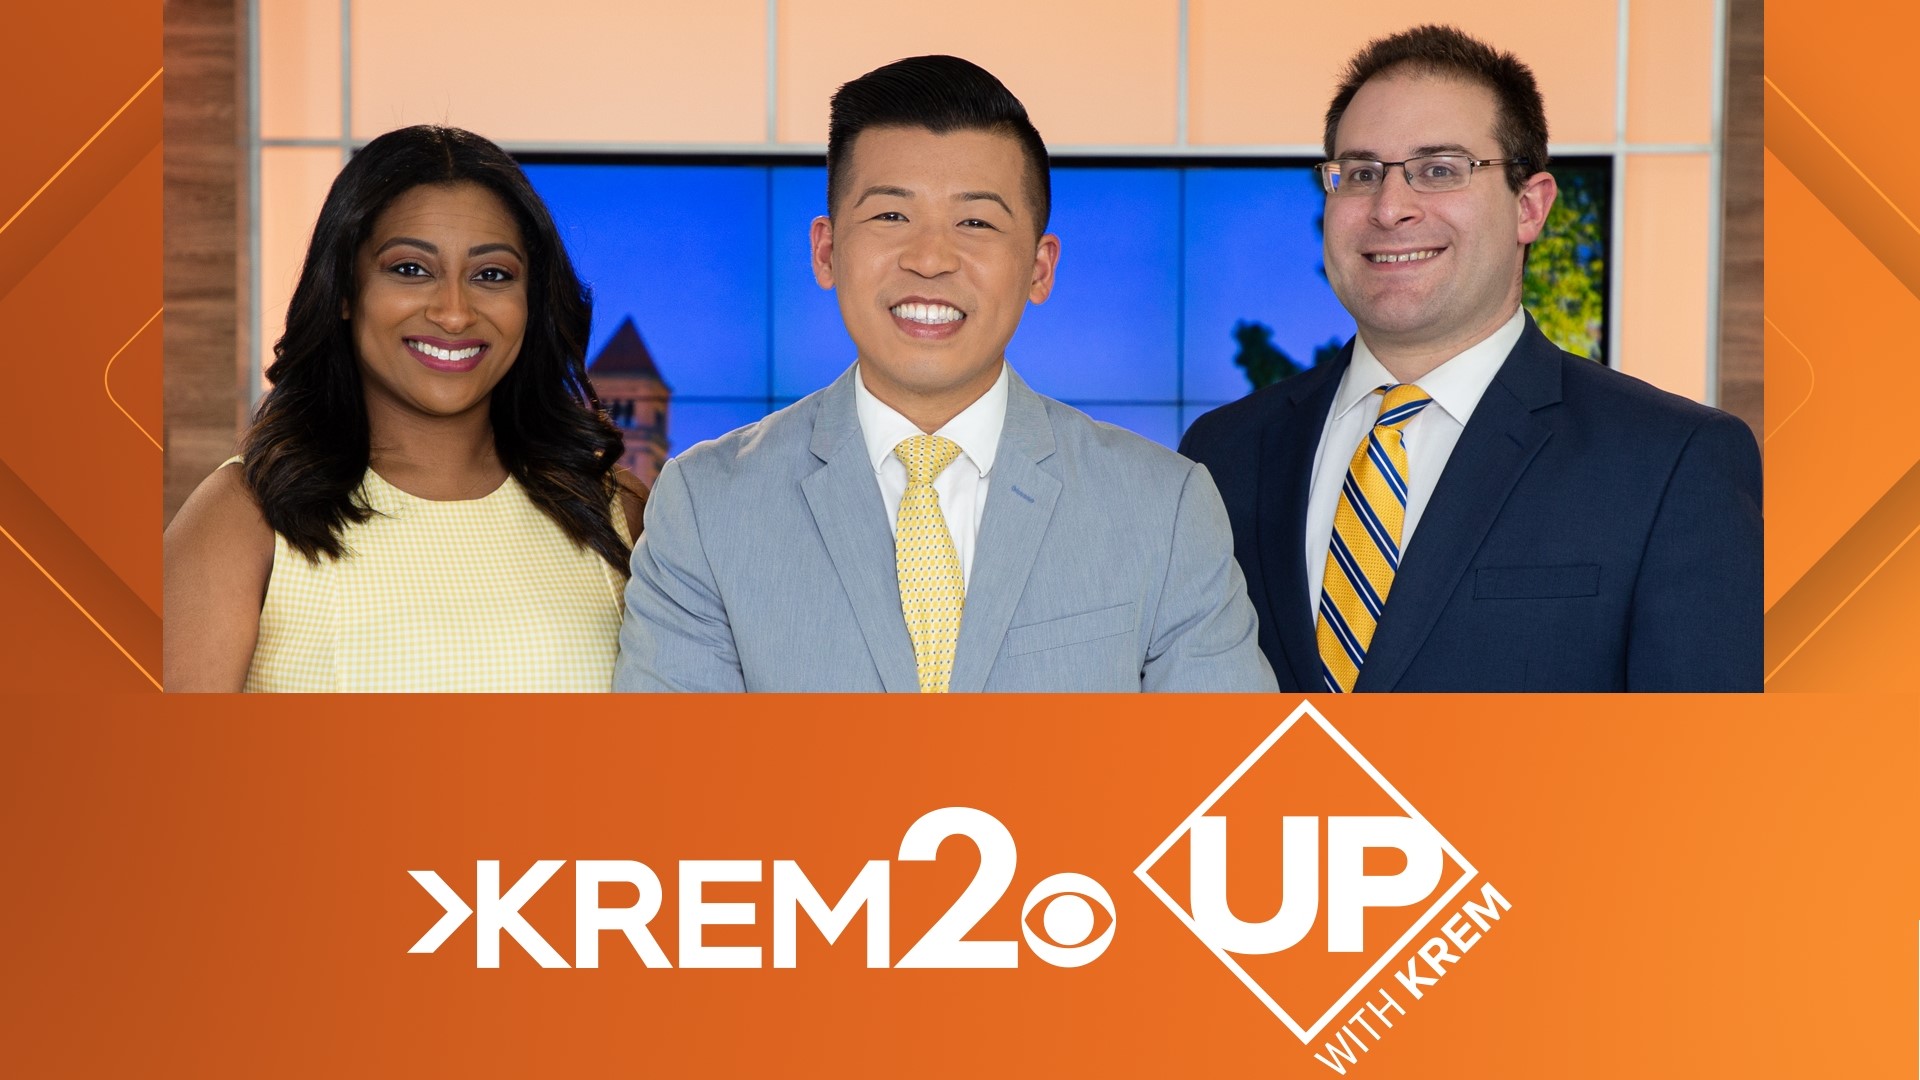 Join 'Up with KREM' for a first look at the day's biggest news stories in Spokane and the Inland Northwest, plus up to the minute weather to help you plan your day.